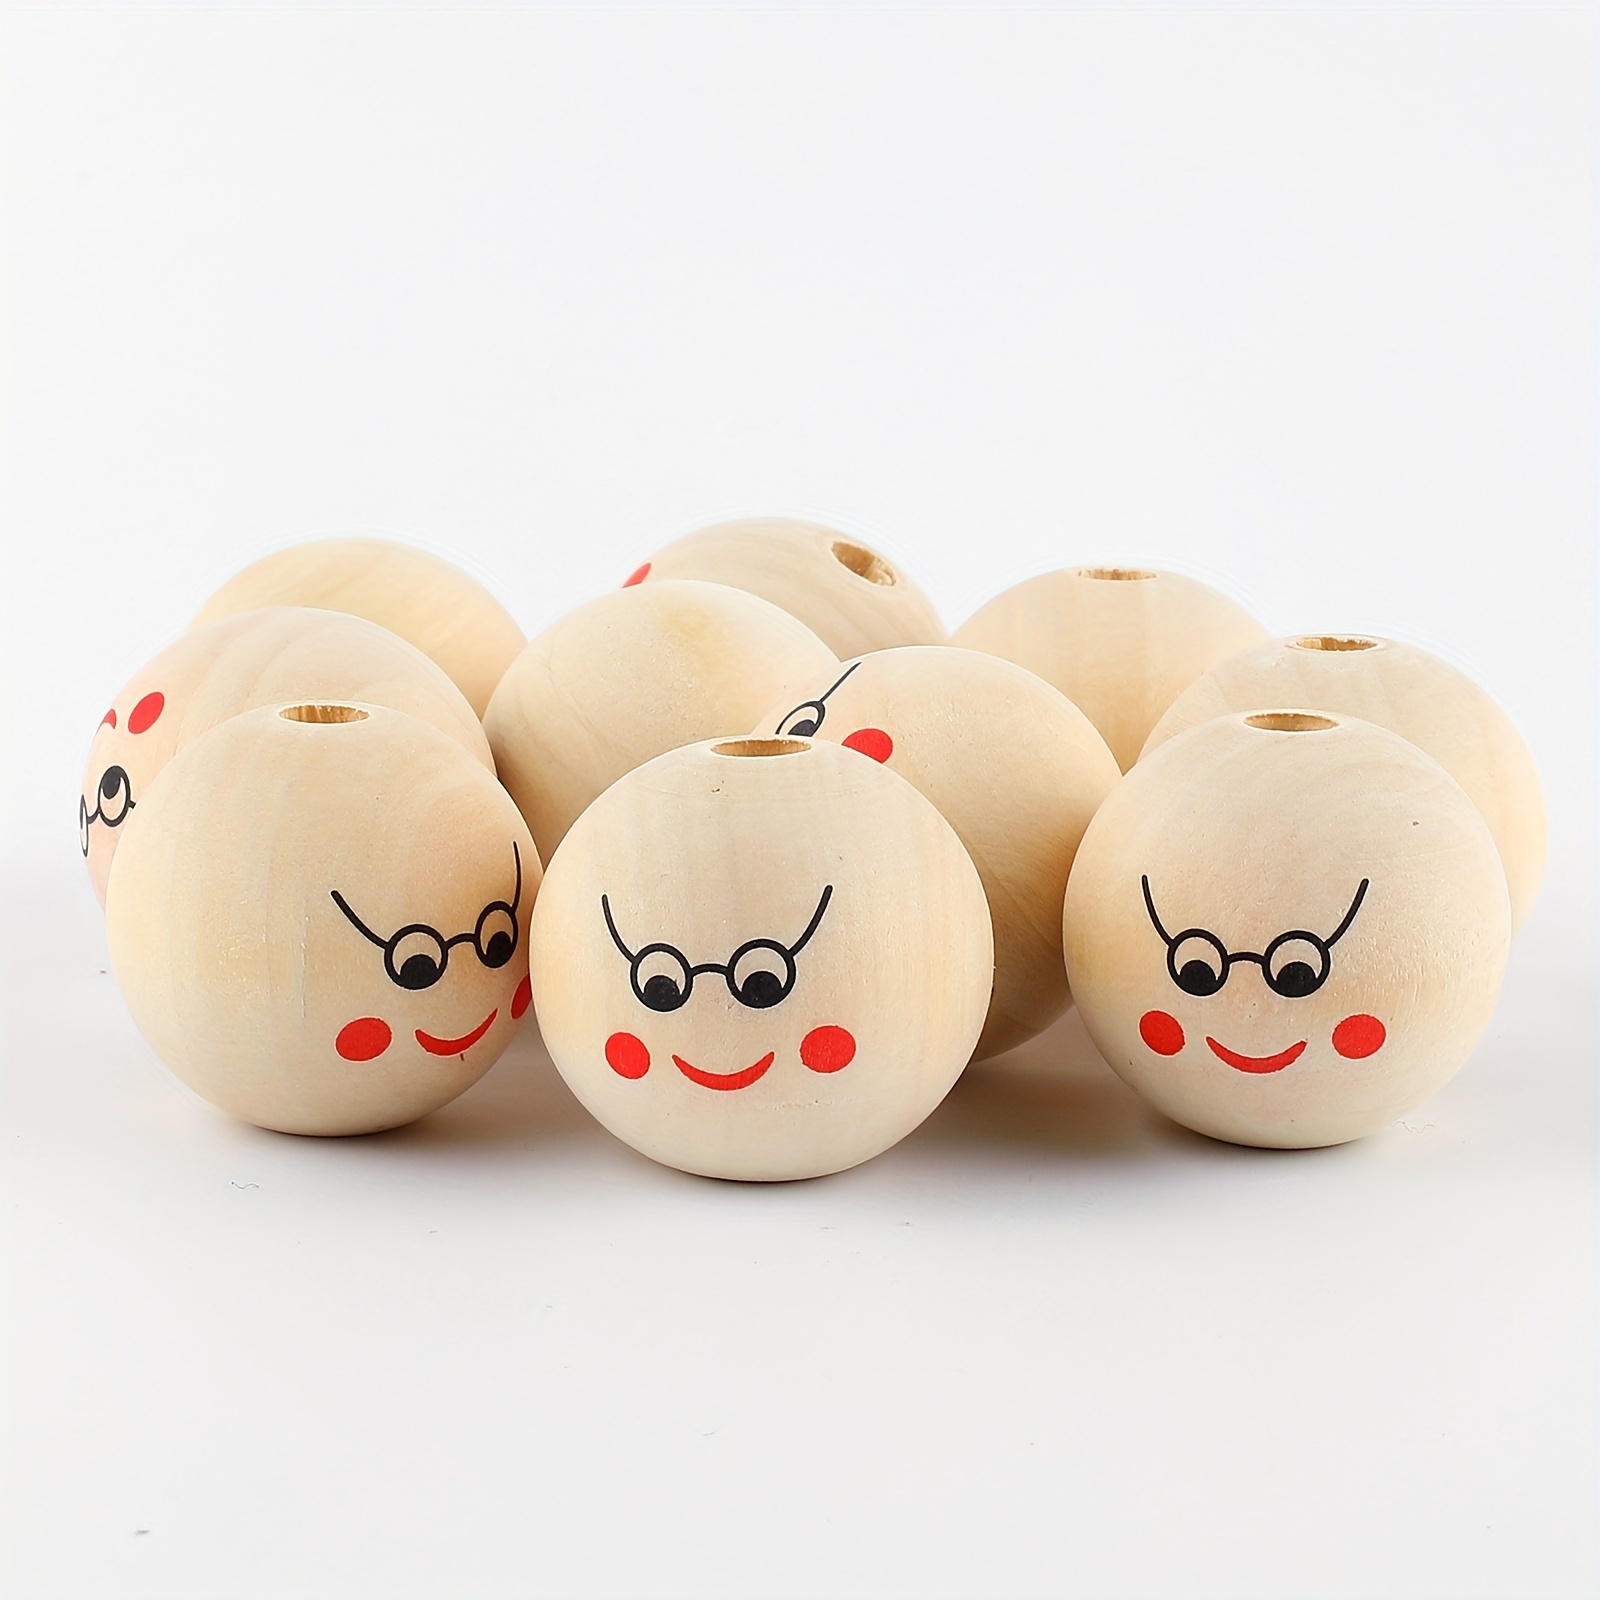 

10pcs 30mm Wood Color Smiling Doll Face Head Wooden Loose Beads For Jewelry Making Diy Creative Cute Beaded Decorations Handmade Craft Supplies